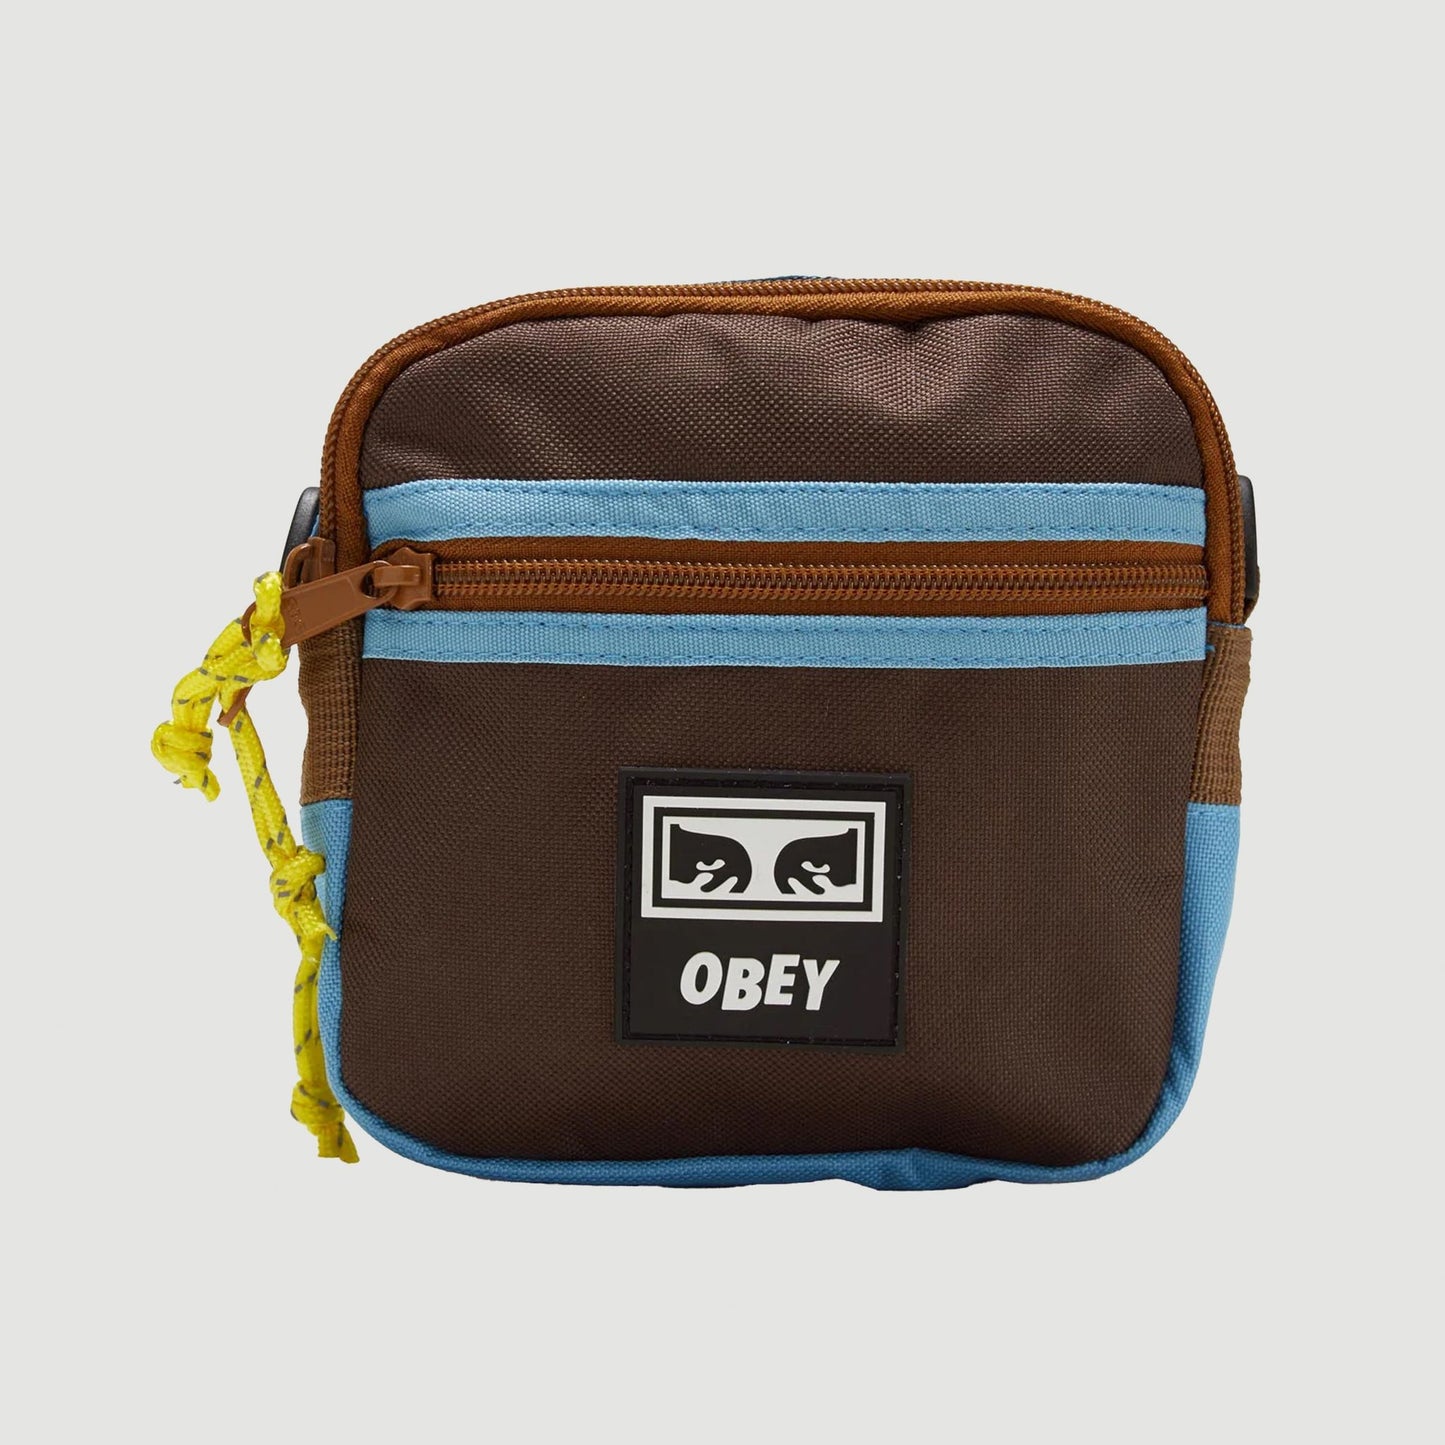 Obey Conditions Traveller Bag III Brown Multi